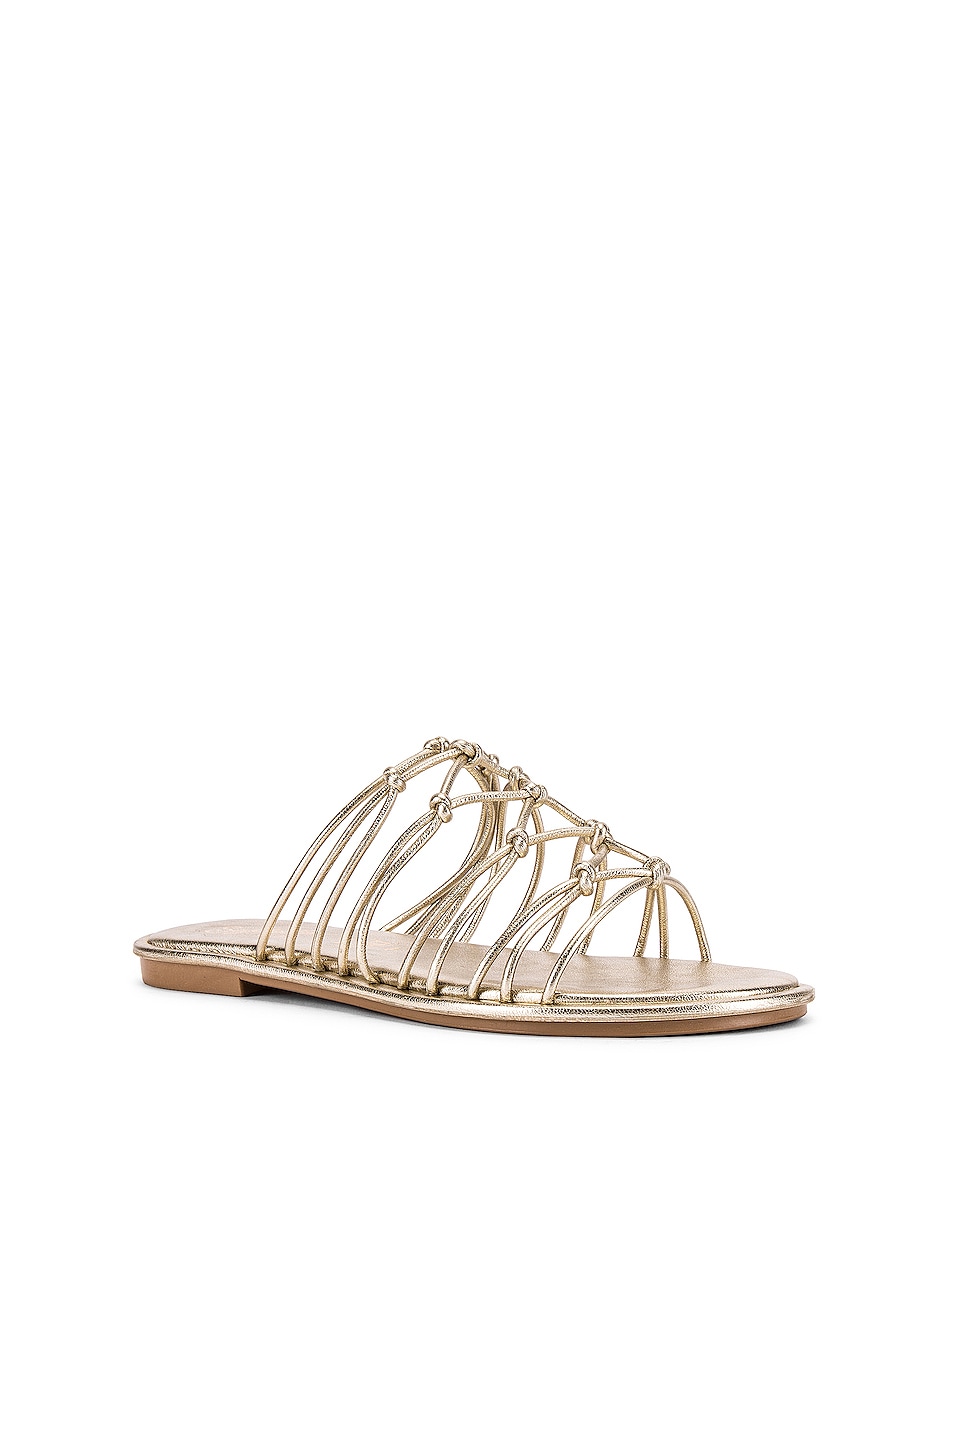 Seychelles Authentic Sandal in Gold | REVOLVE